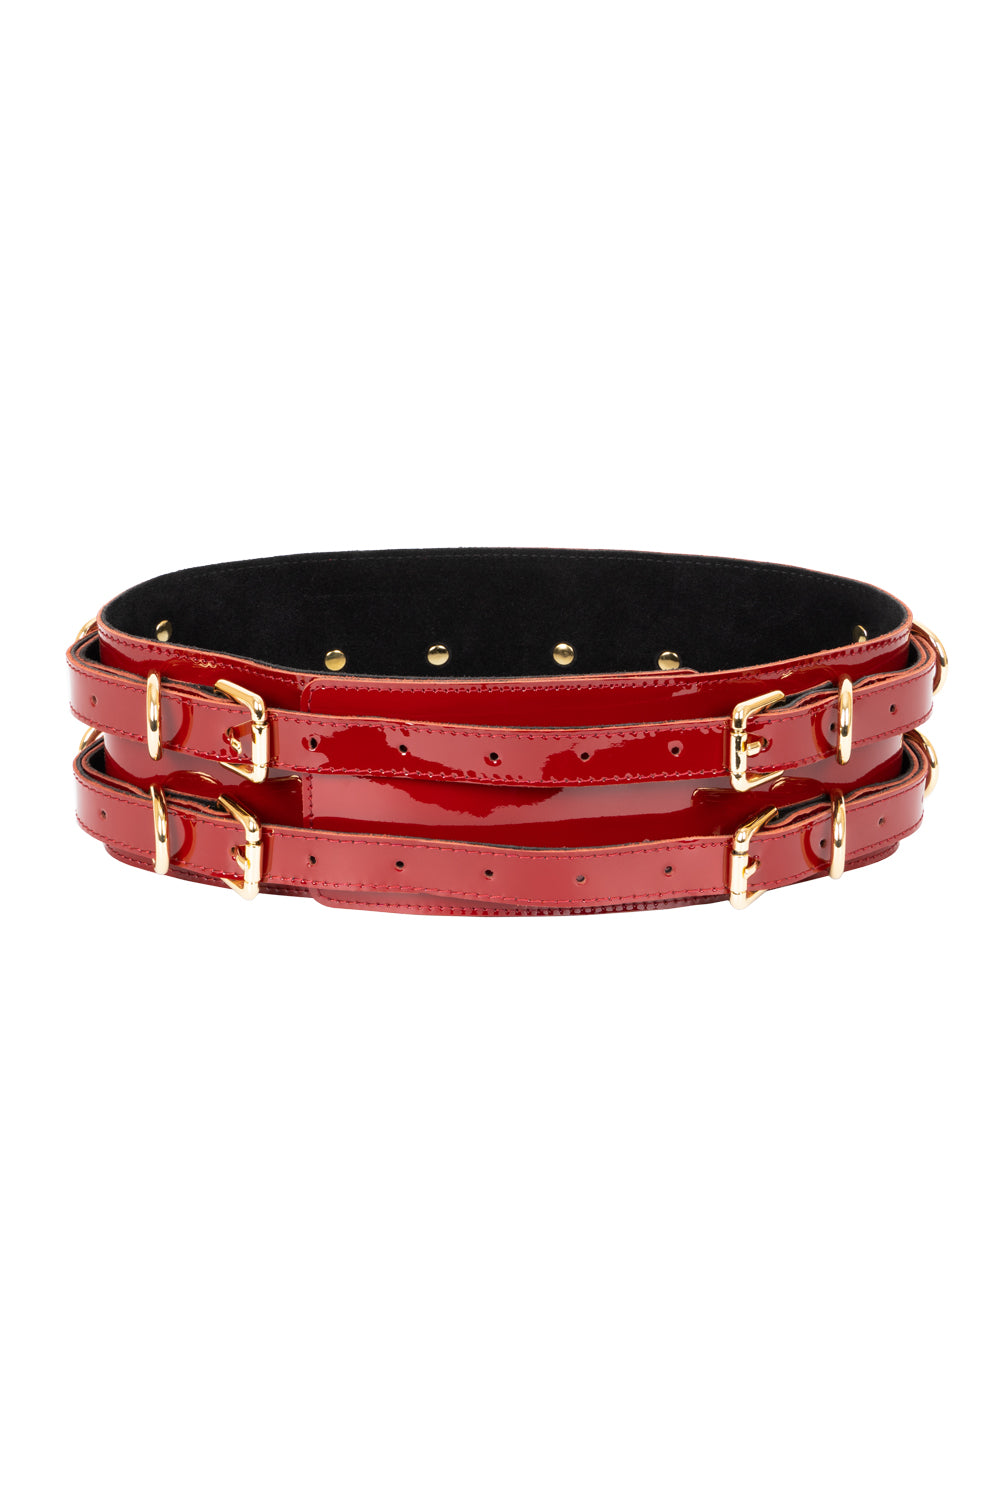 Lacquered Leather Waist Belt. Burgundy